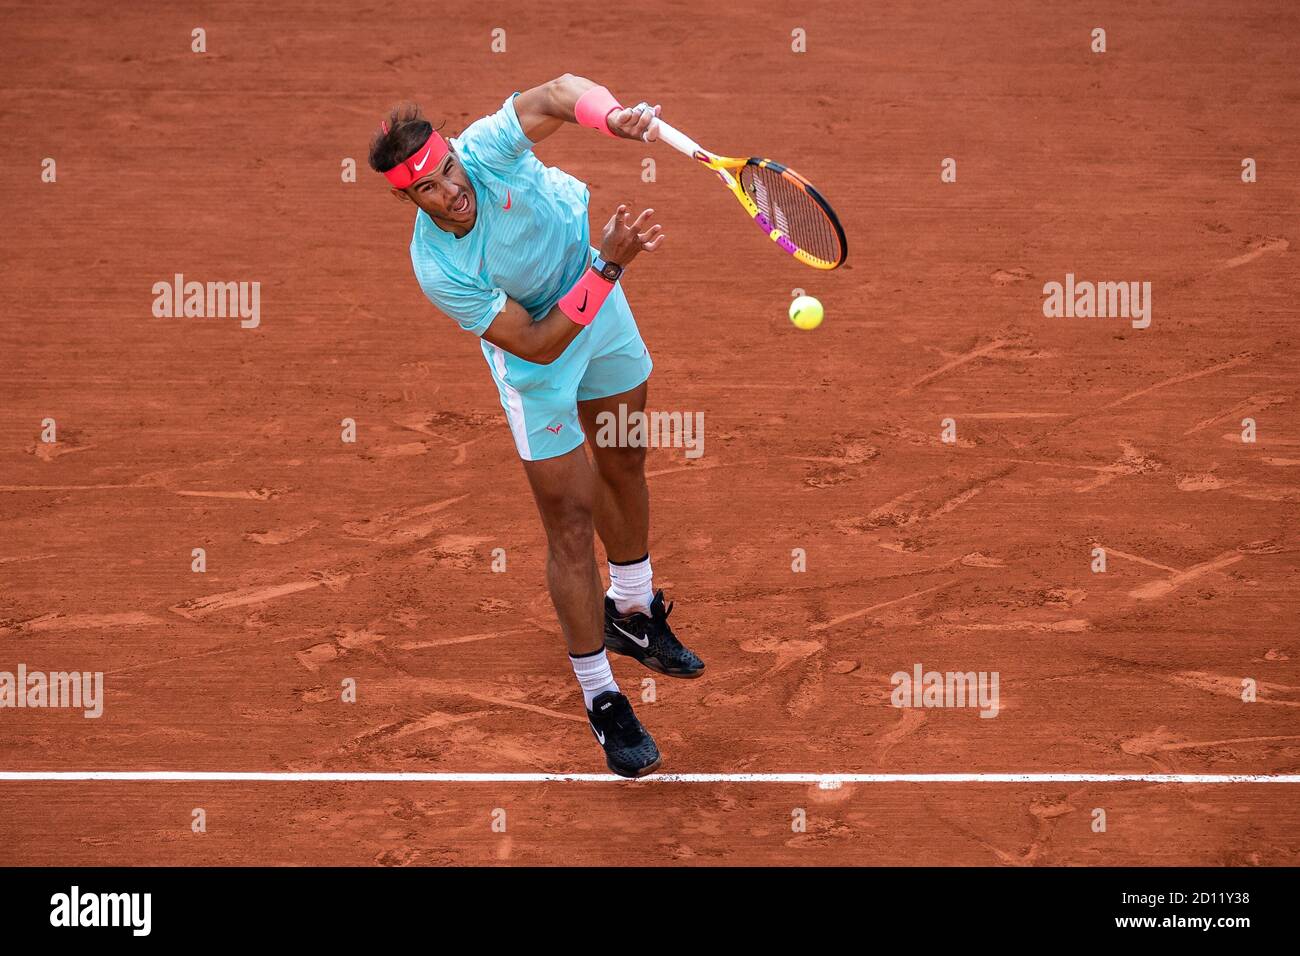 Paris, France. 4th Oct, 2020. Rafael Nadal serves during the men's singles 4th round match between Rafael Nadal of Spain and Sebastian Korda of the United States at the French Open tennis tournament 2020 at Roland Garros in Paris, France, Oct. 4, 2020. Credit: Aurelien Morissard/Xinhua/Alamy Live News Stock Photo